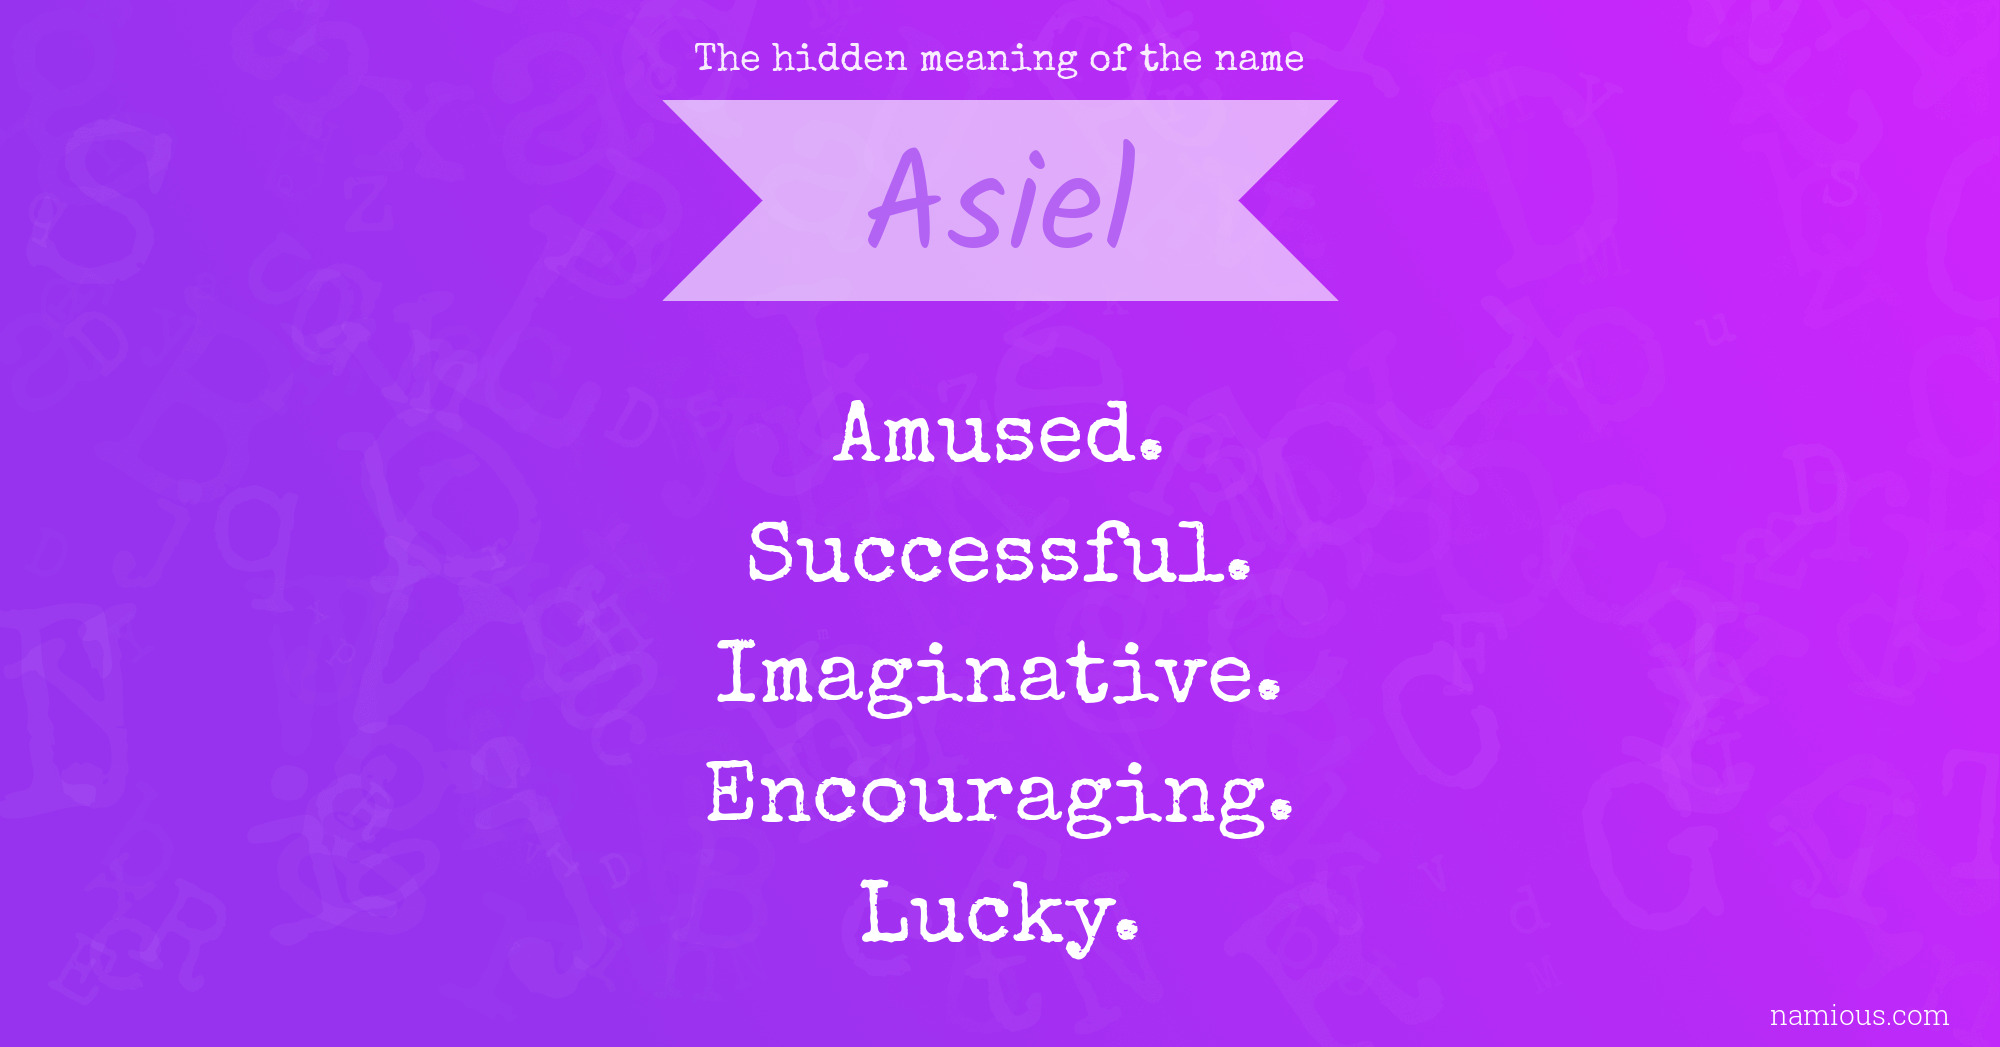 The hidden meaning of the name Asiel